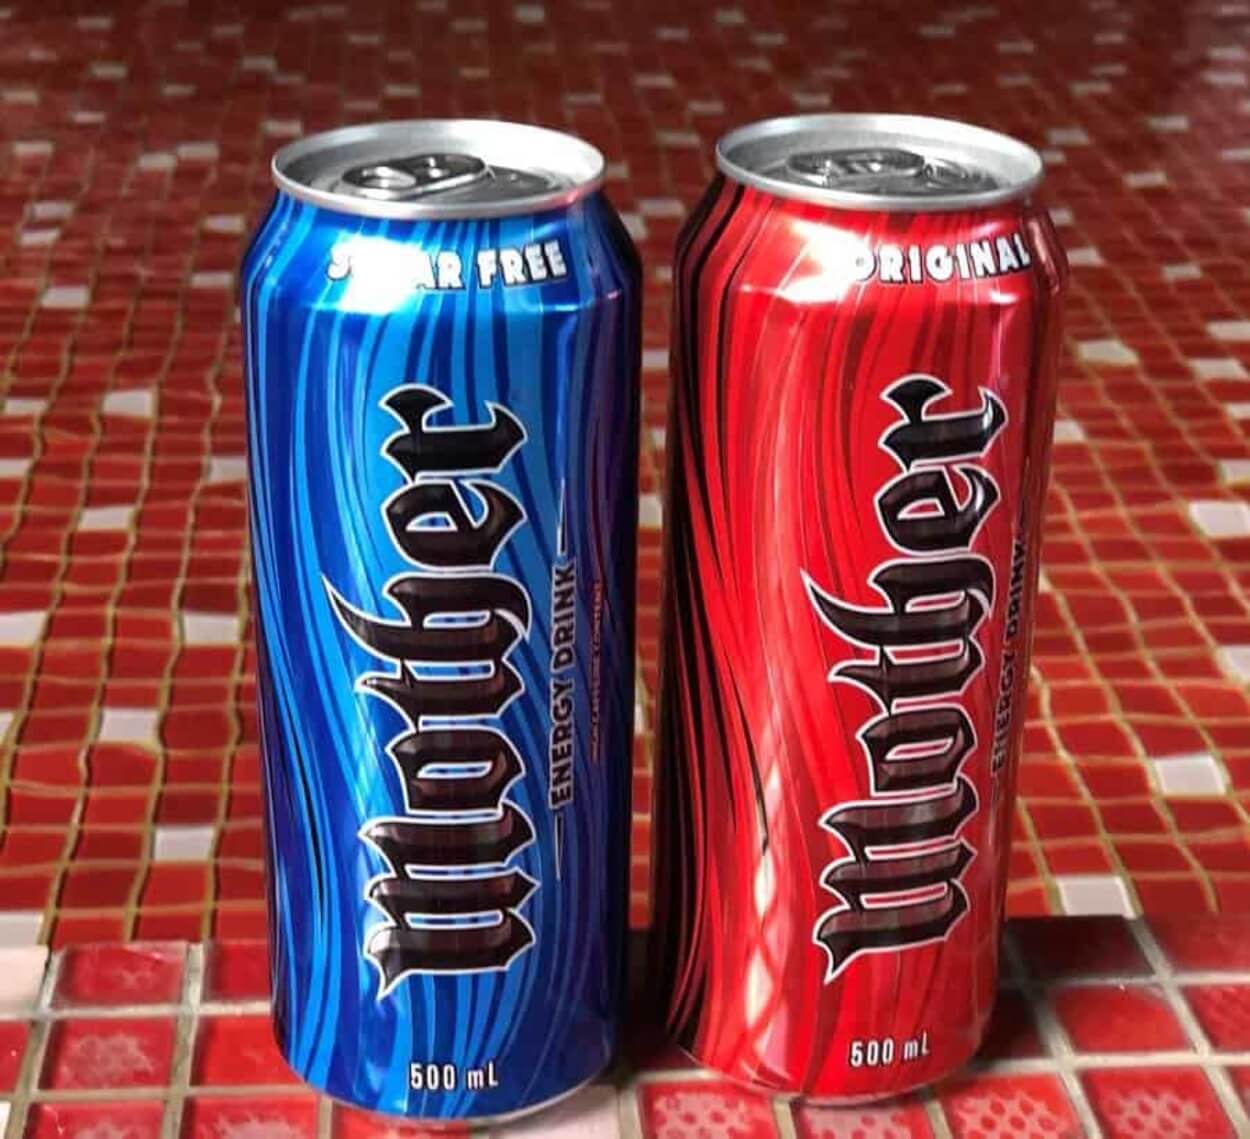 Two cans of Mother energy drink.